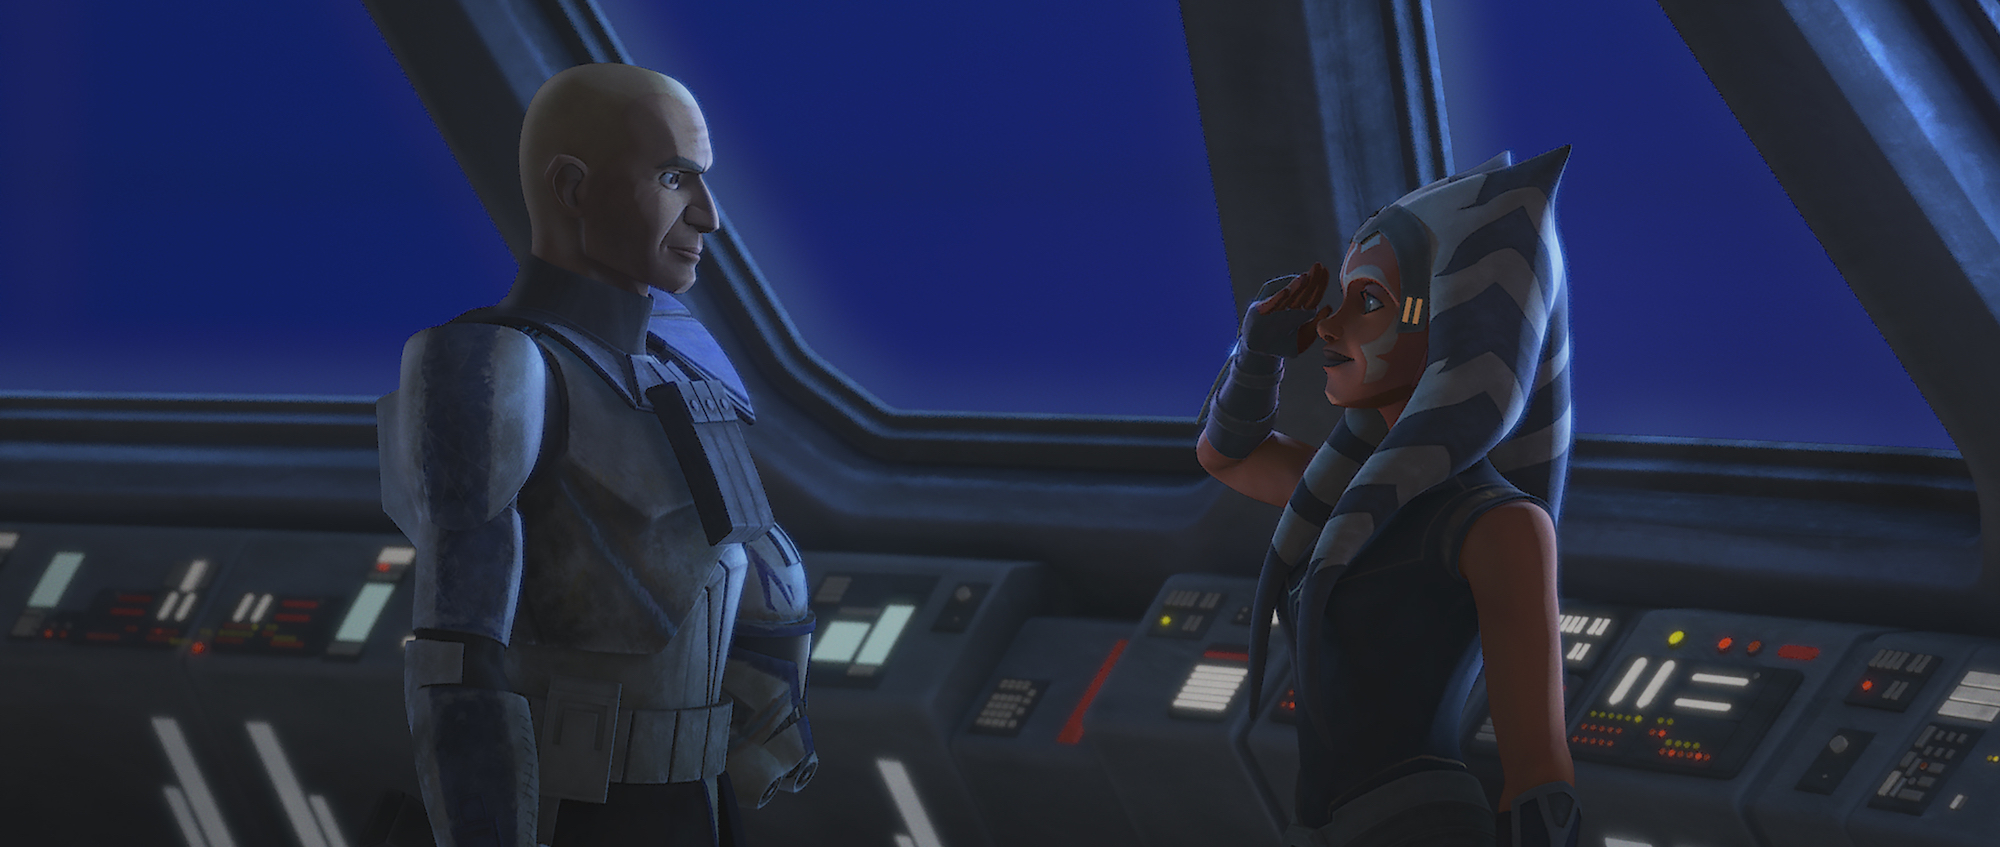 Rex and Ahsoka in hyperspace, right before Order 66 in 'Star Wars: The Clone Wars'' Season 7.